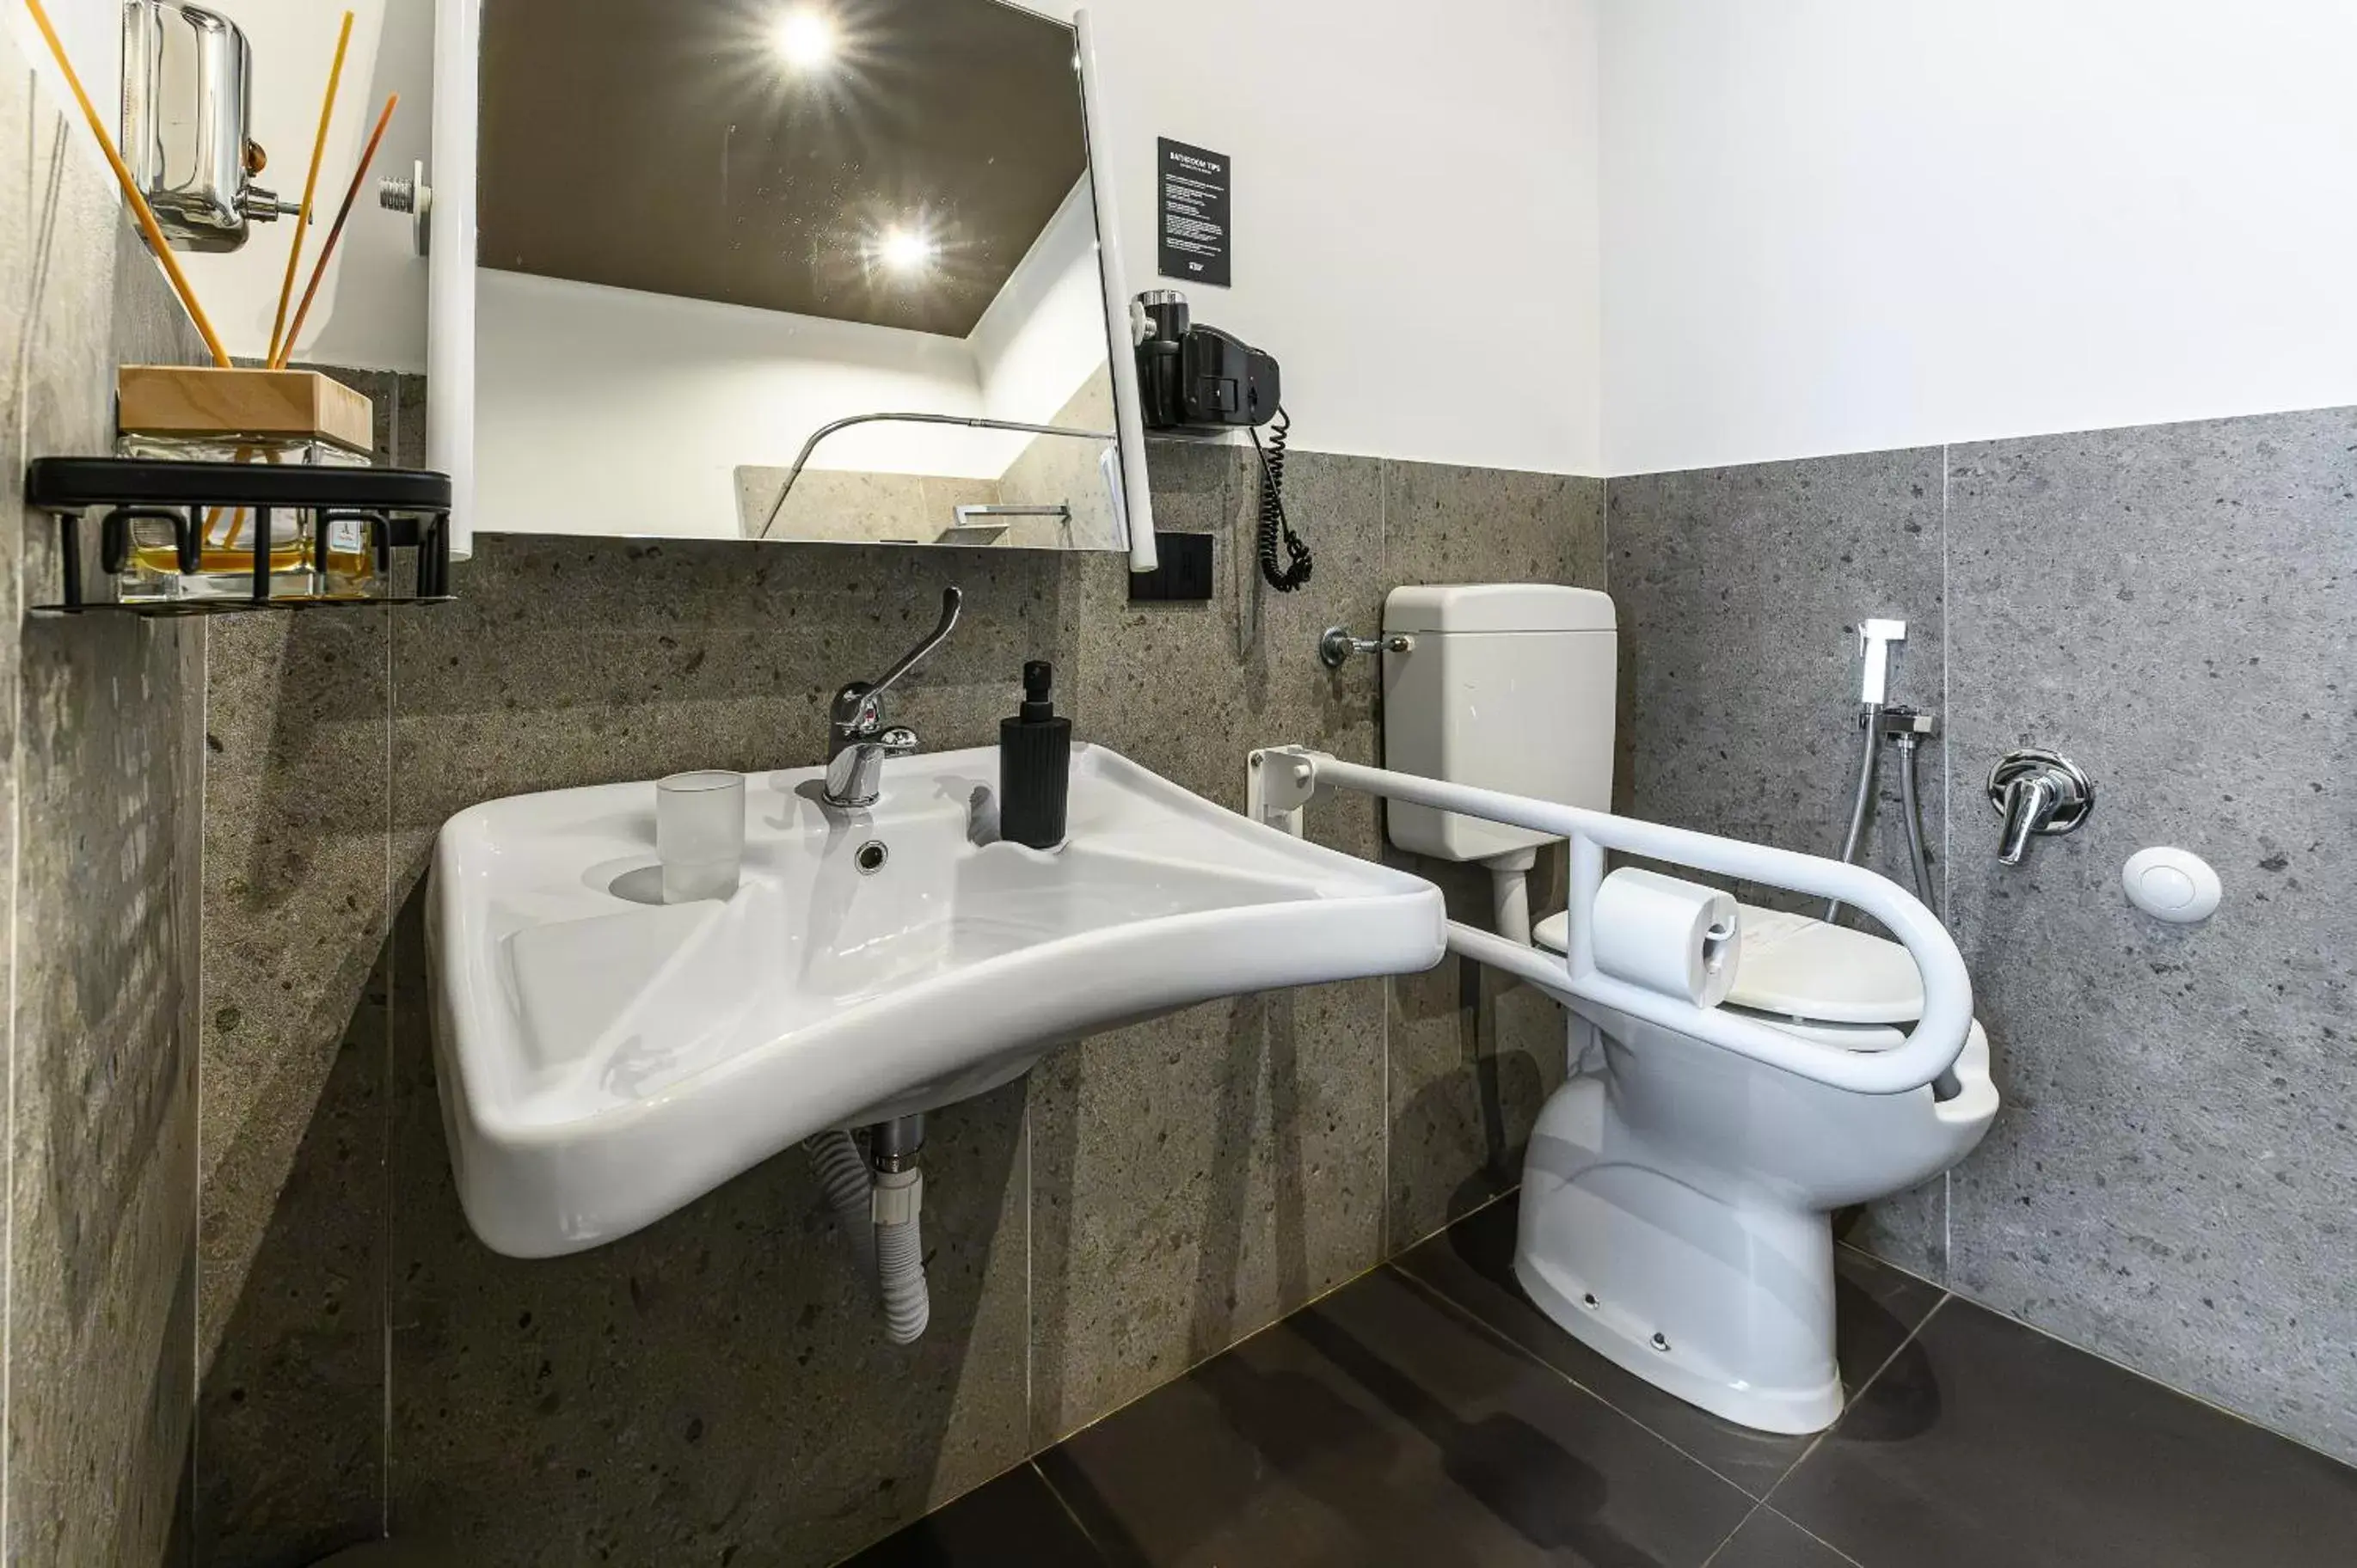 Facility for disabled guests, Bathroom in Central Lodge Hotel